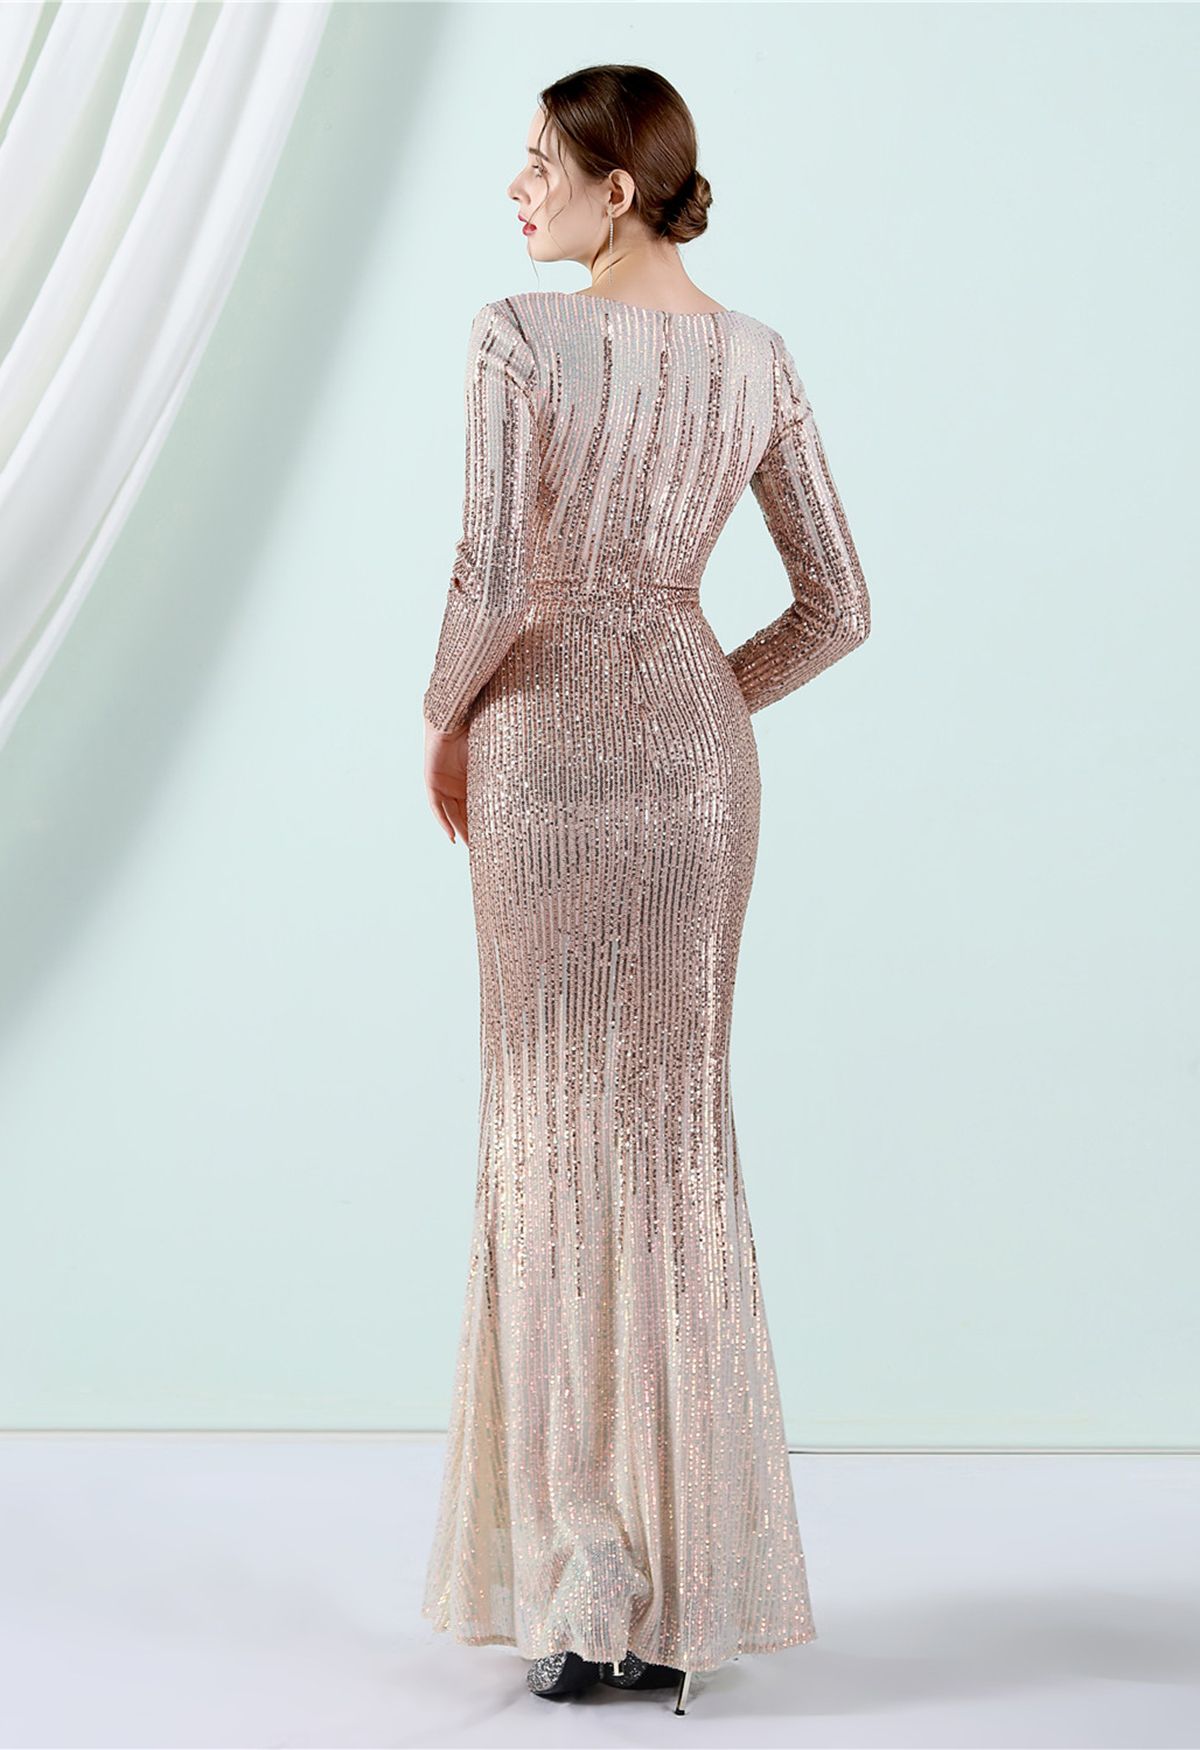 Full Sequin Two-Tone Crisscross Gown in Gold